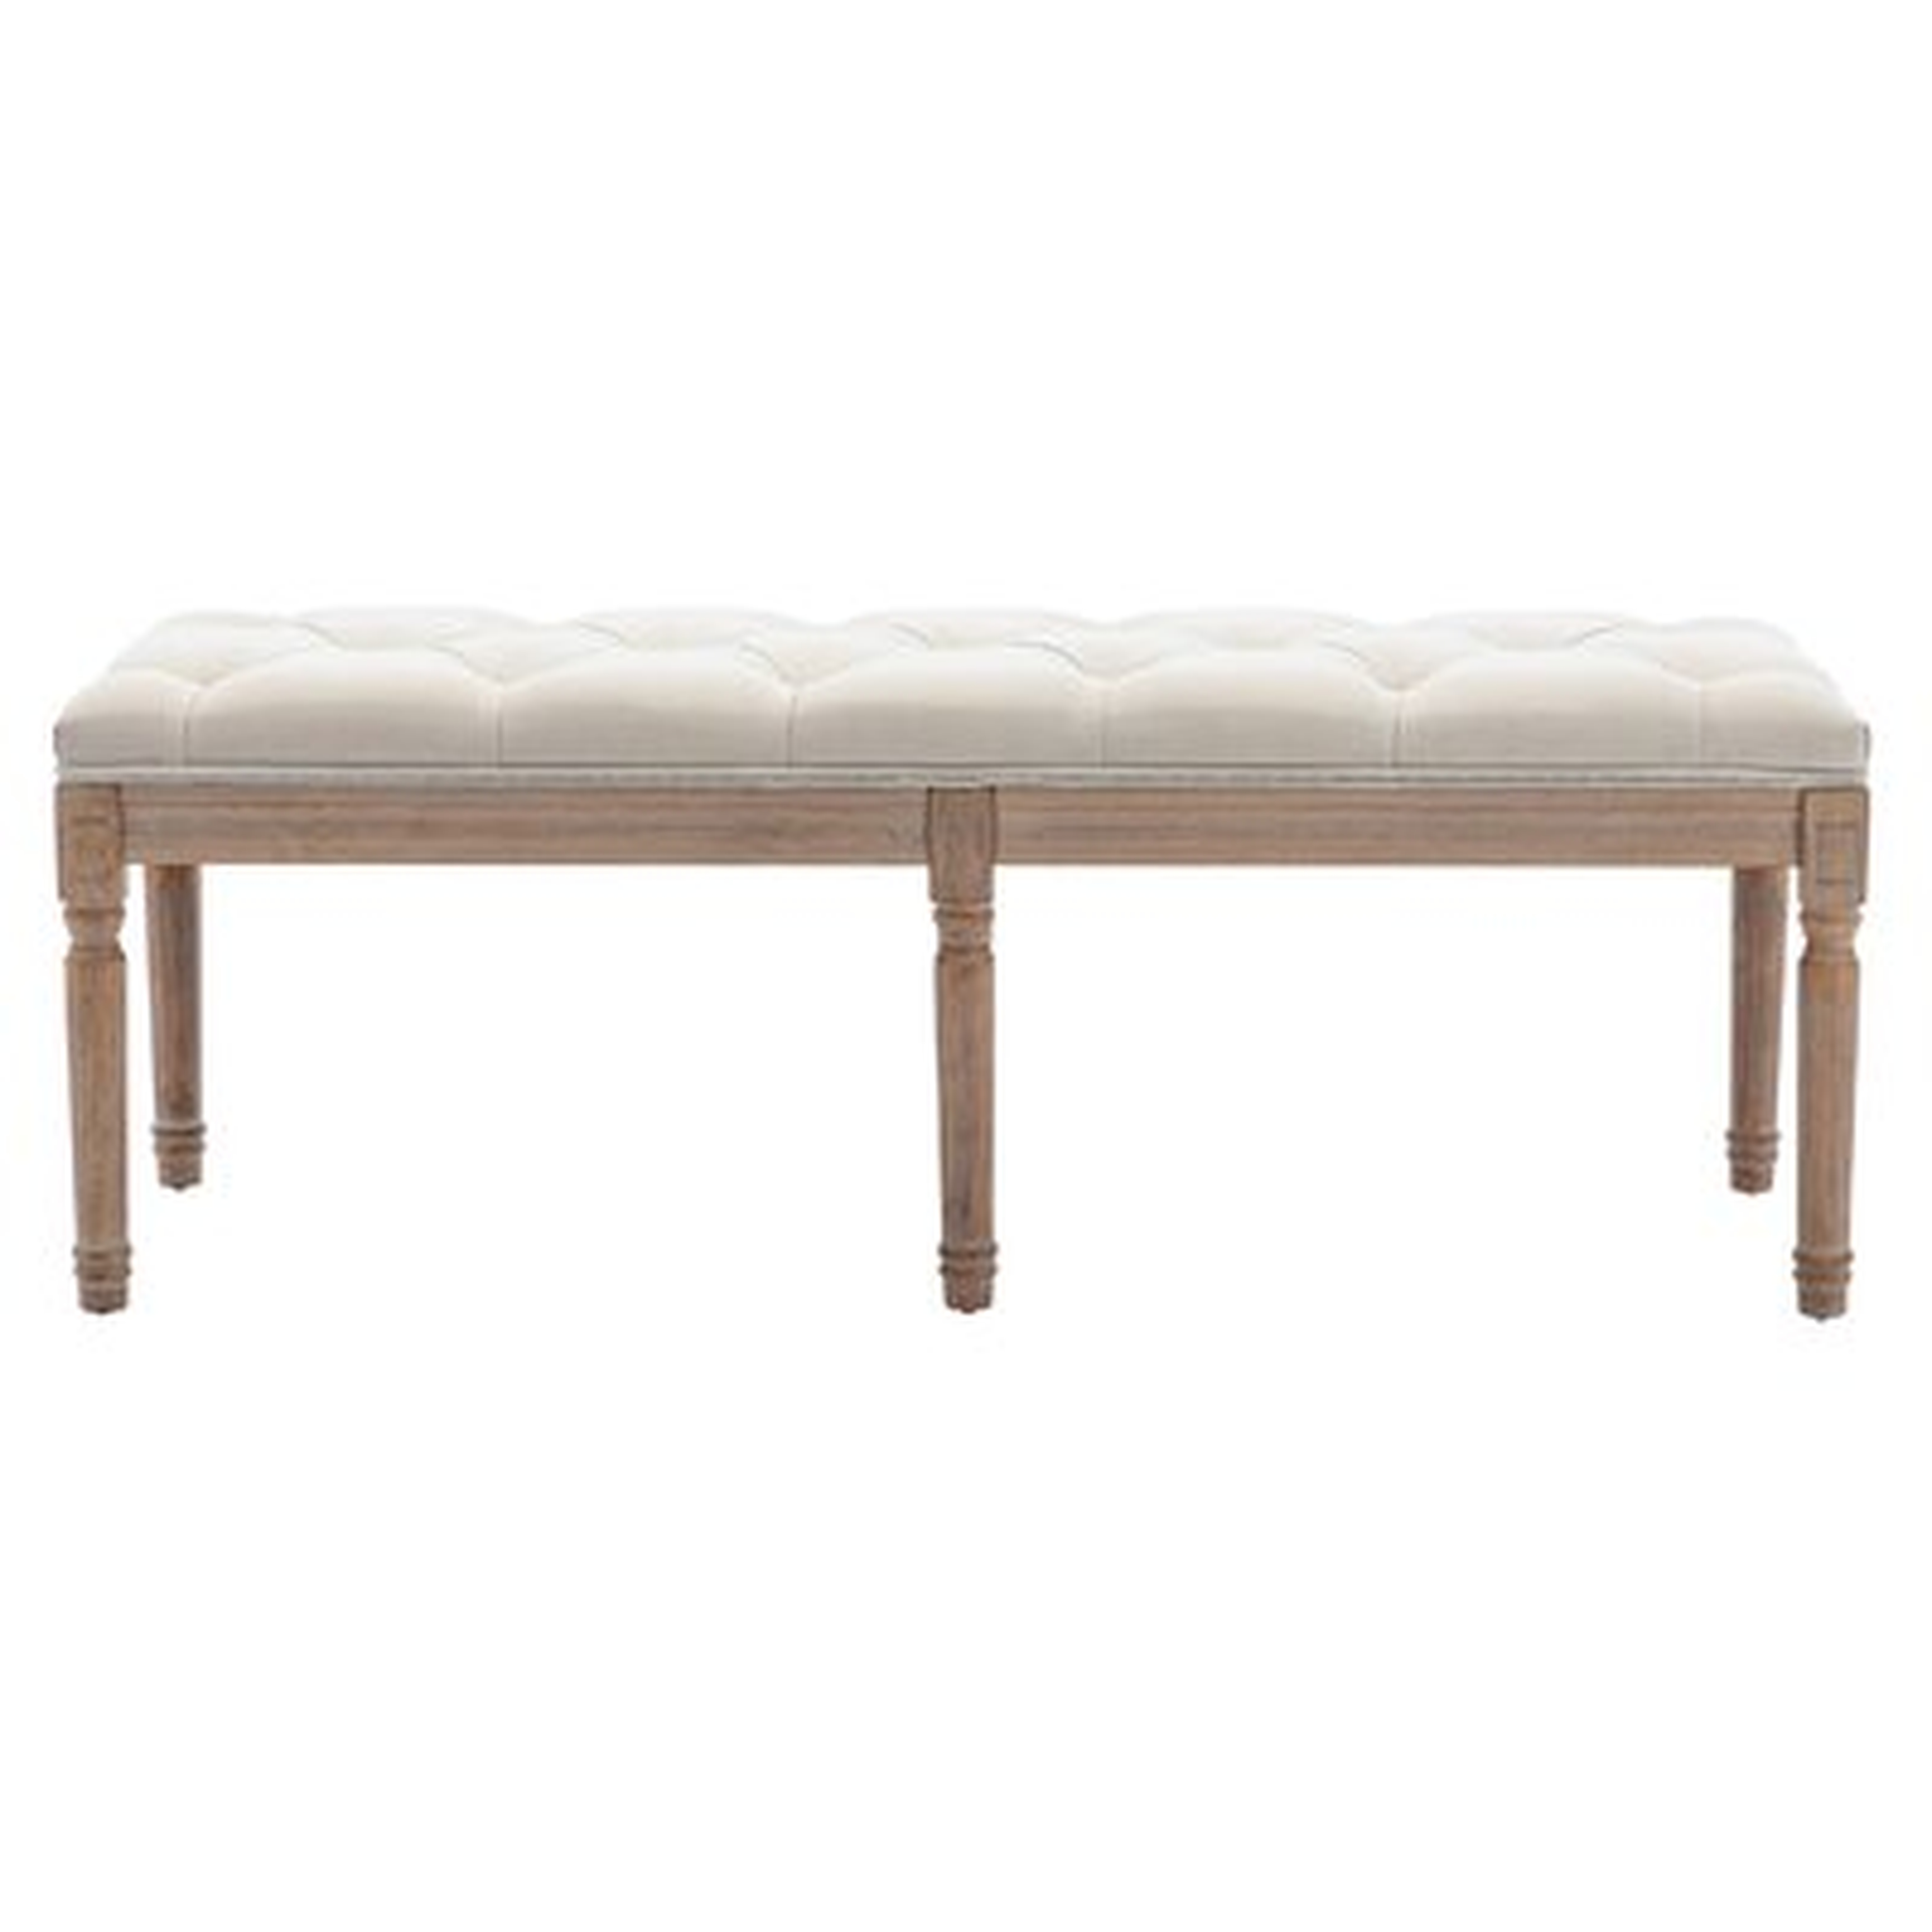 Tufted Linen Upholstered Entryway Bench With Padded Seat And Solid Rubberwood Legs Upholstered Shoe Bench End Of Bed Bench For Living Room Bedroom Hallway - Wayfair